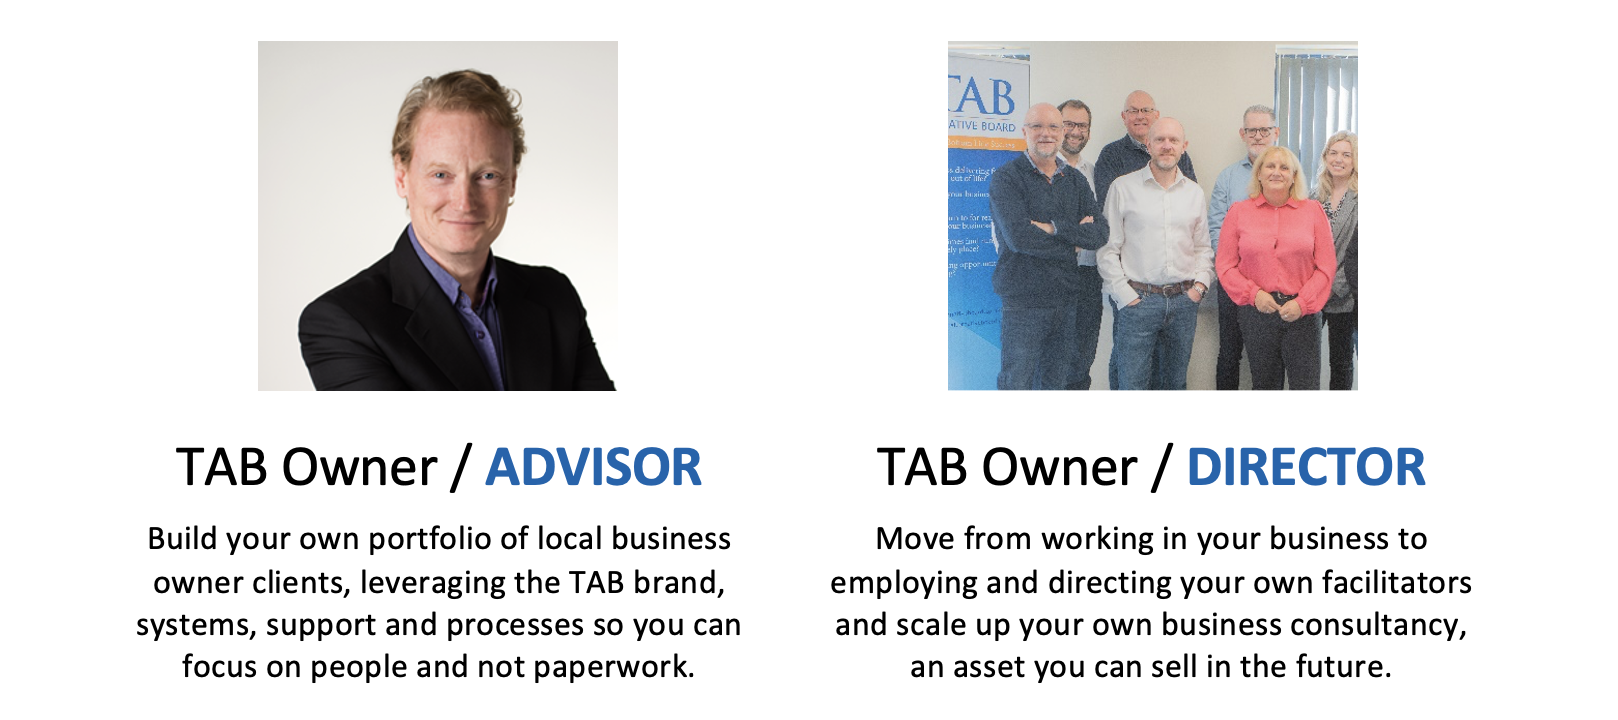 Choose your TAB business journey